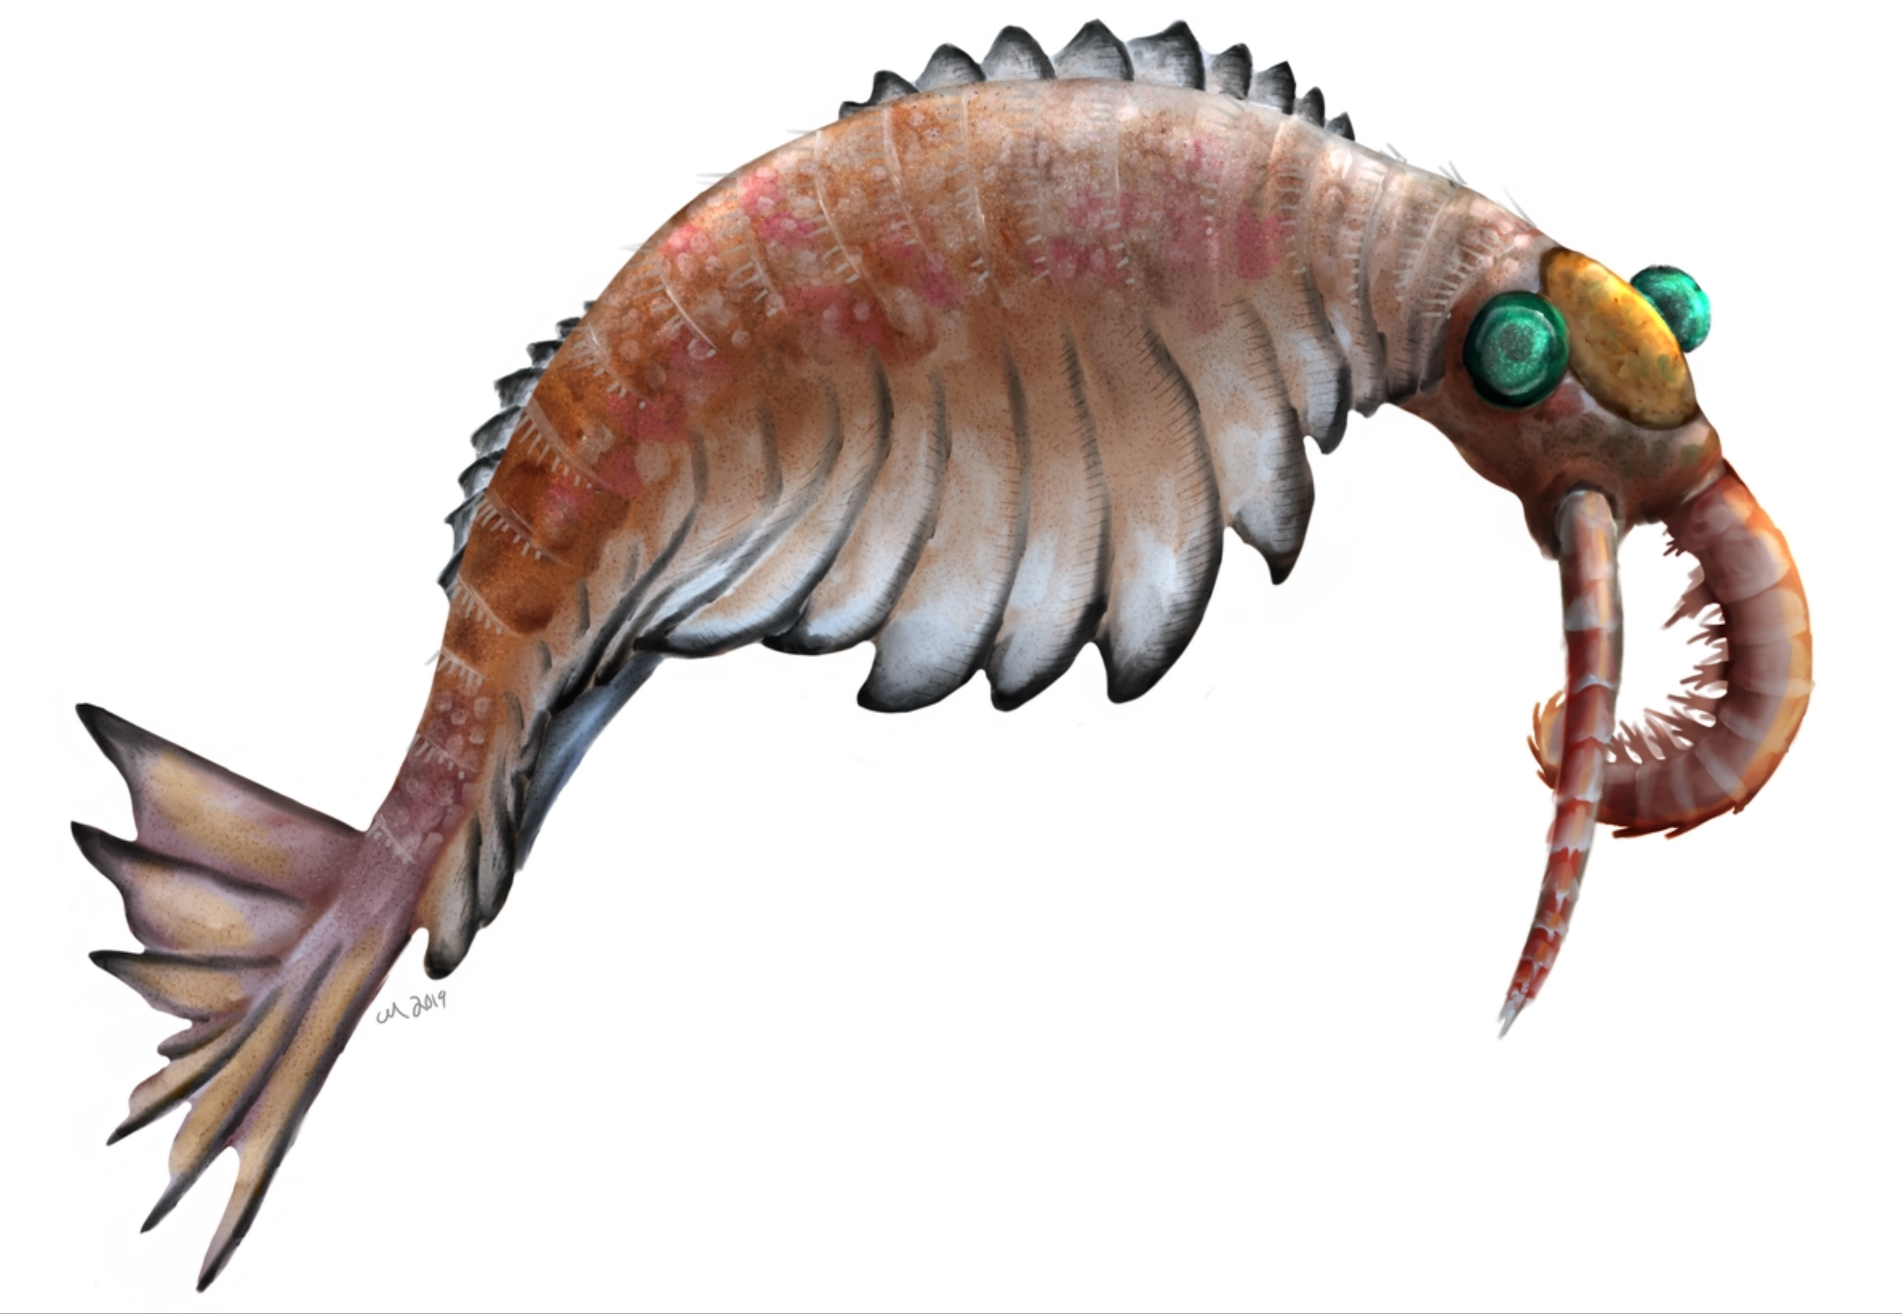 Anomalocaris canadensis is one of the many animal species that emerged in the Cambrian explosion, starting some 542 million years ago, and found in the fossil beds of the Burgess shale.